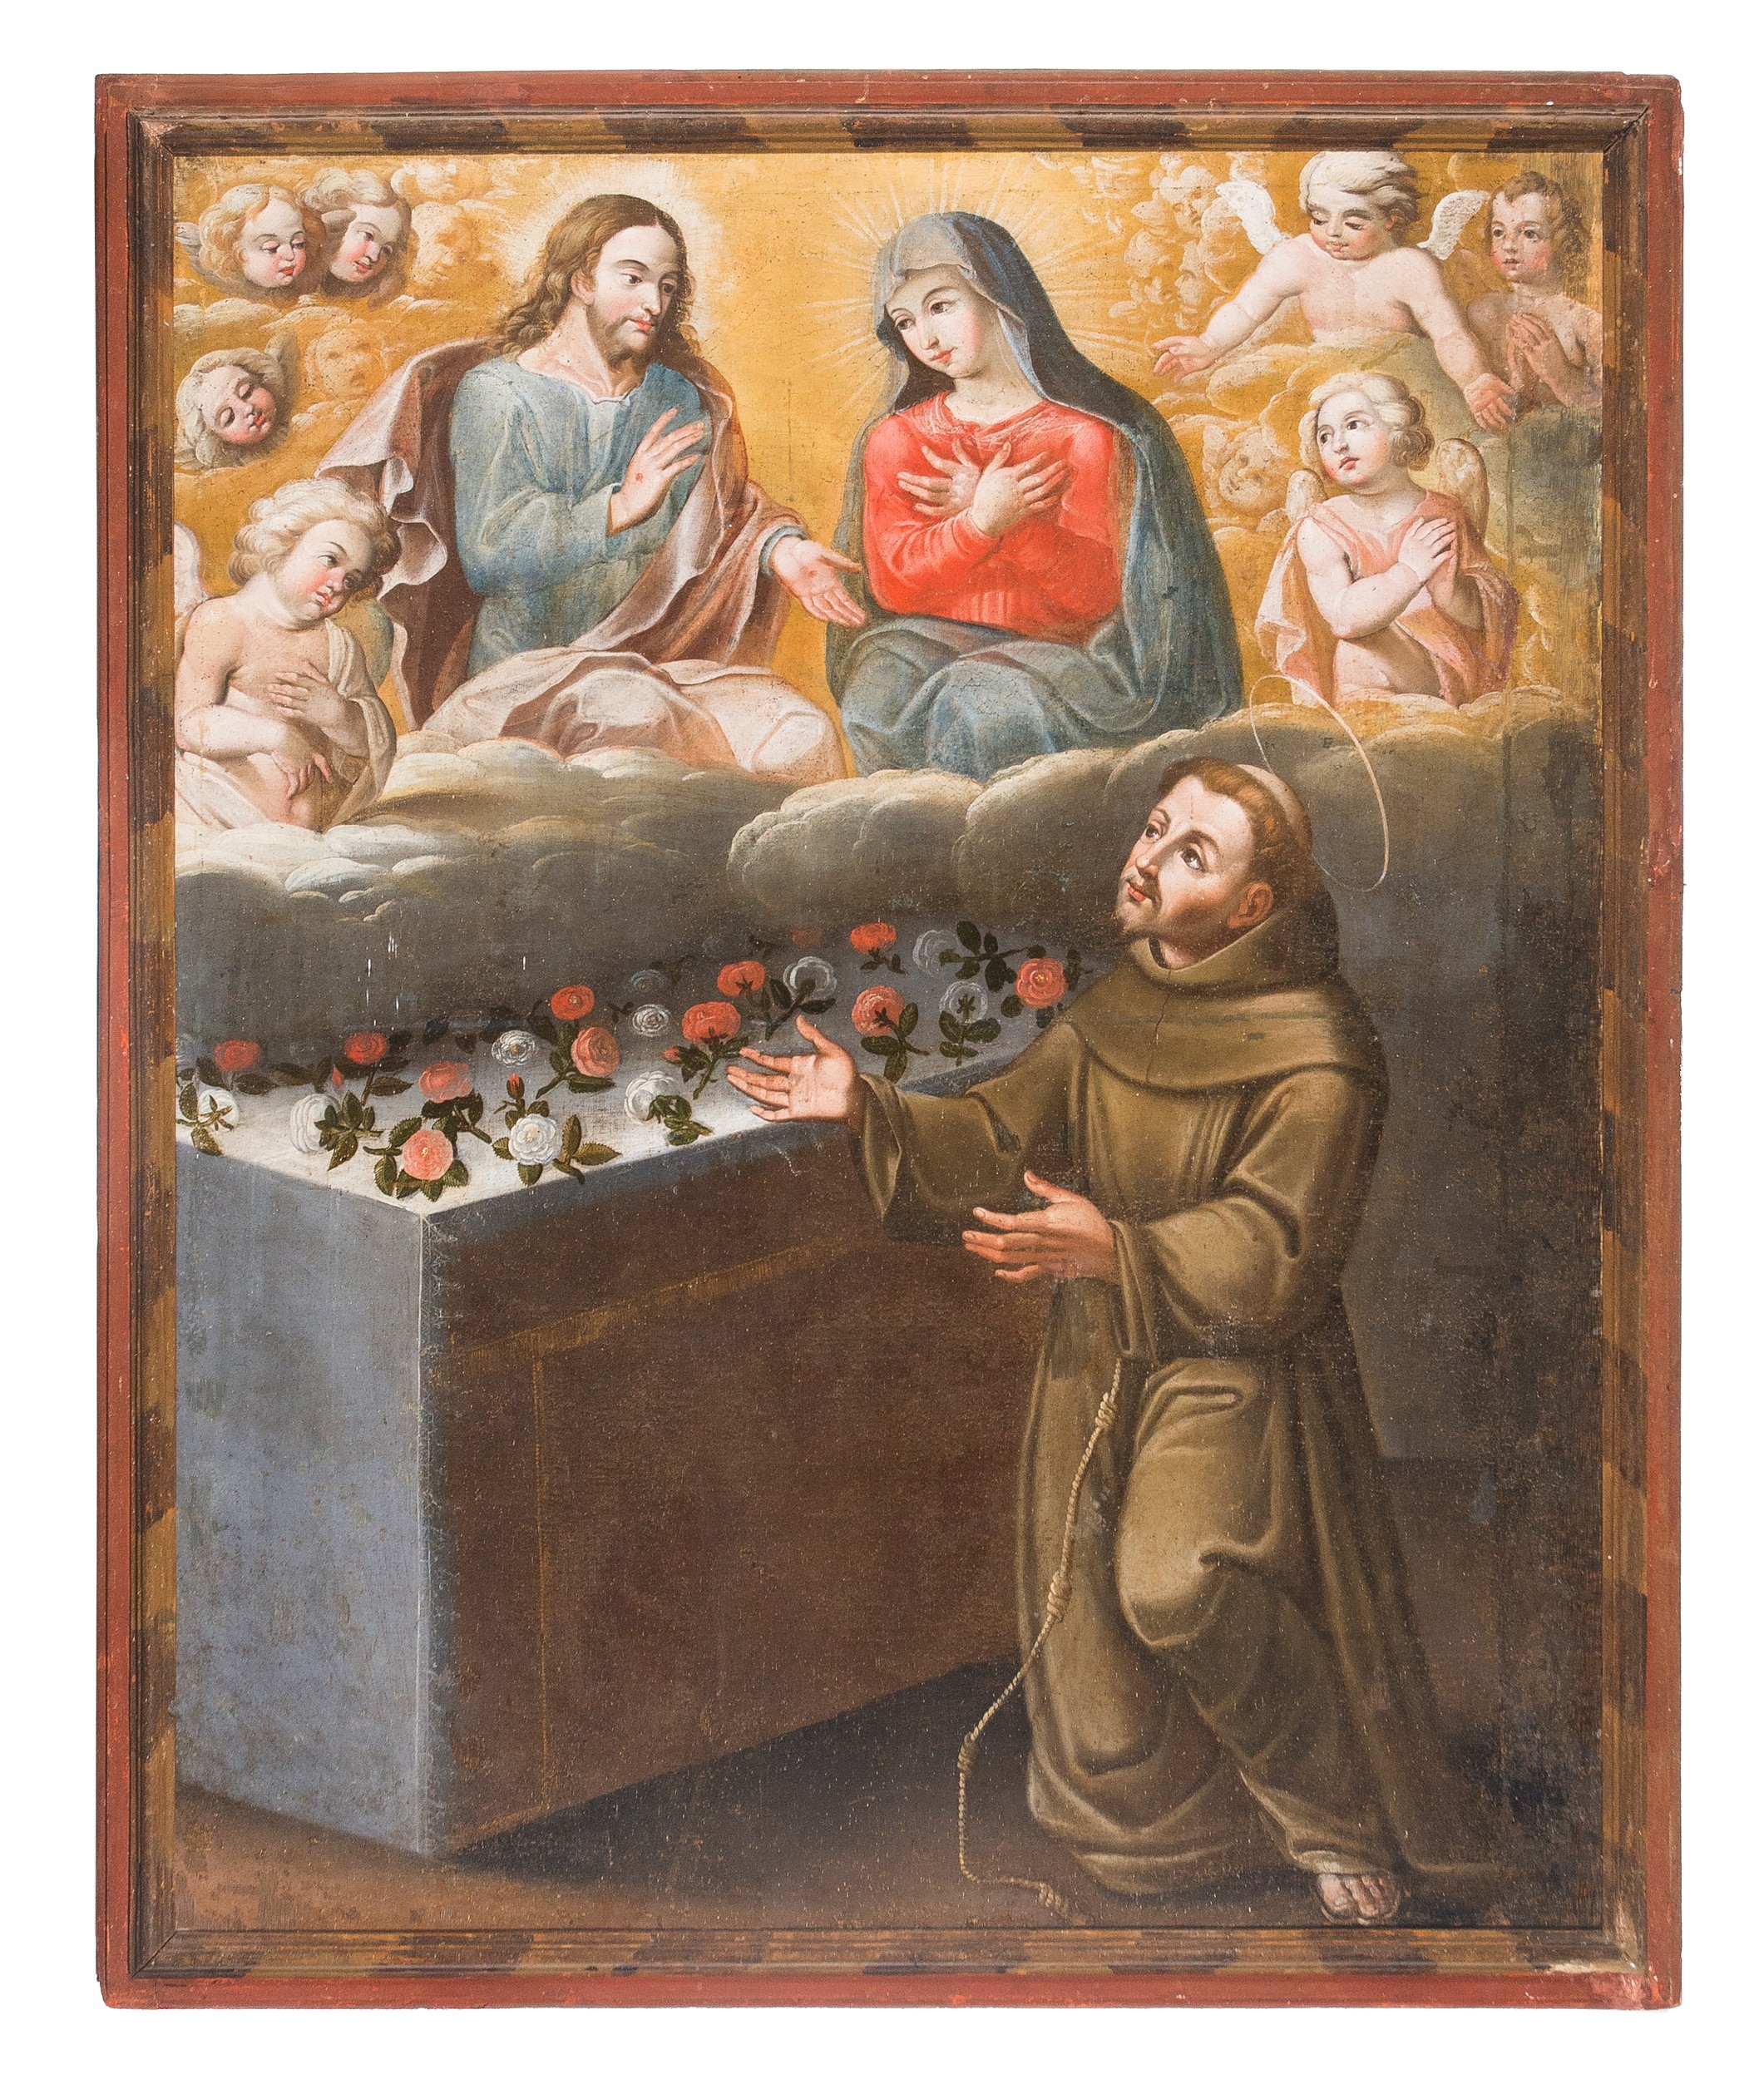 Apparition of Christ and the Virgin Mary to Saint Francis of Assisi by Colonial School, 17th Century, 17th - 18th century